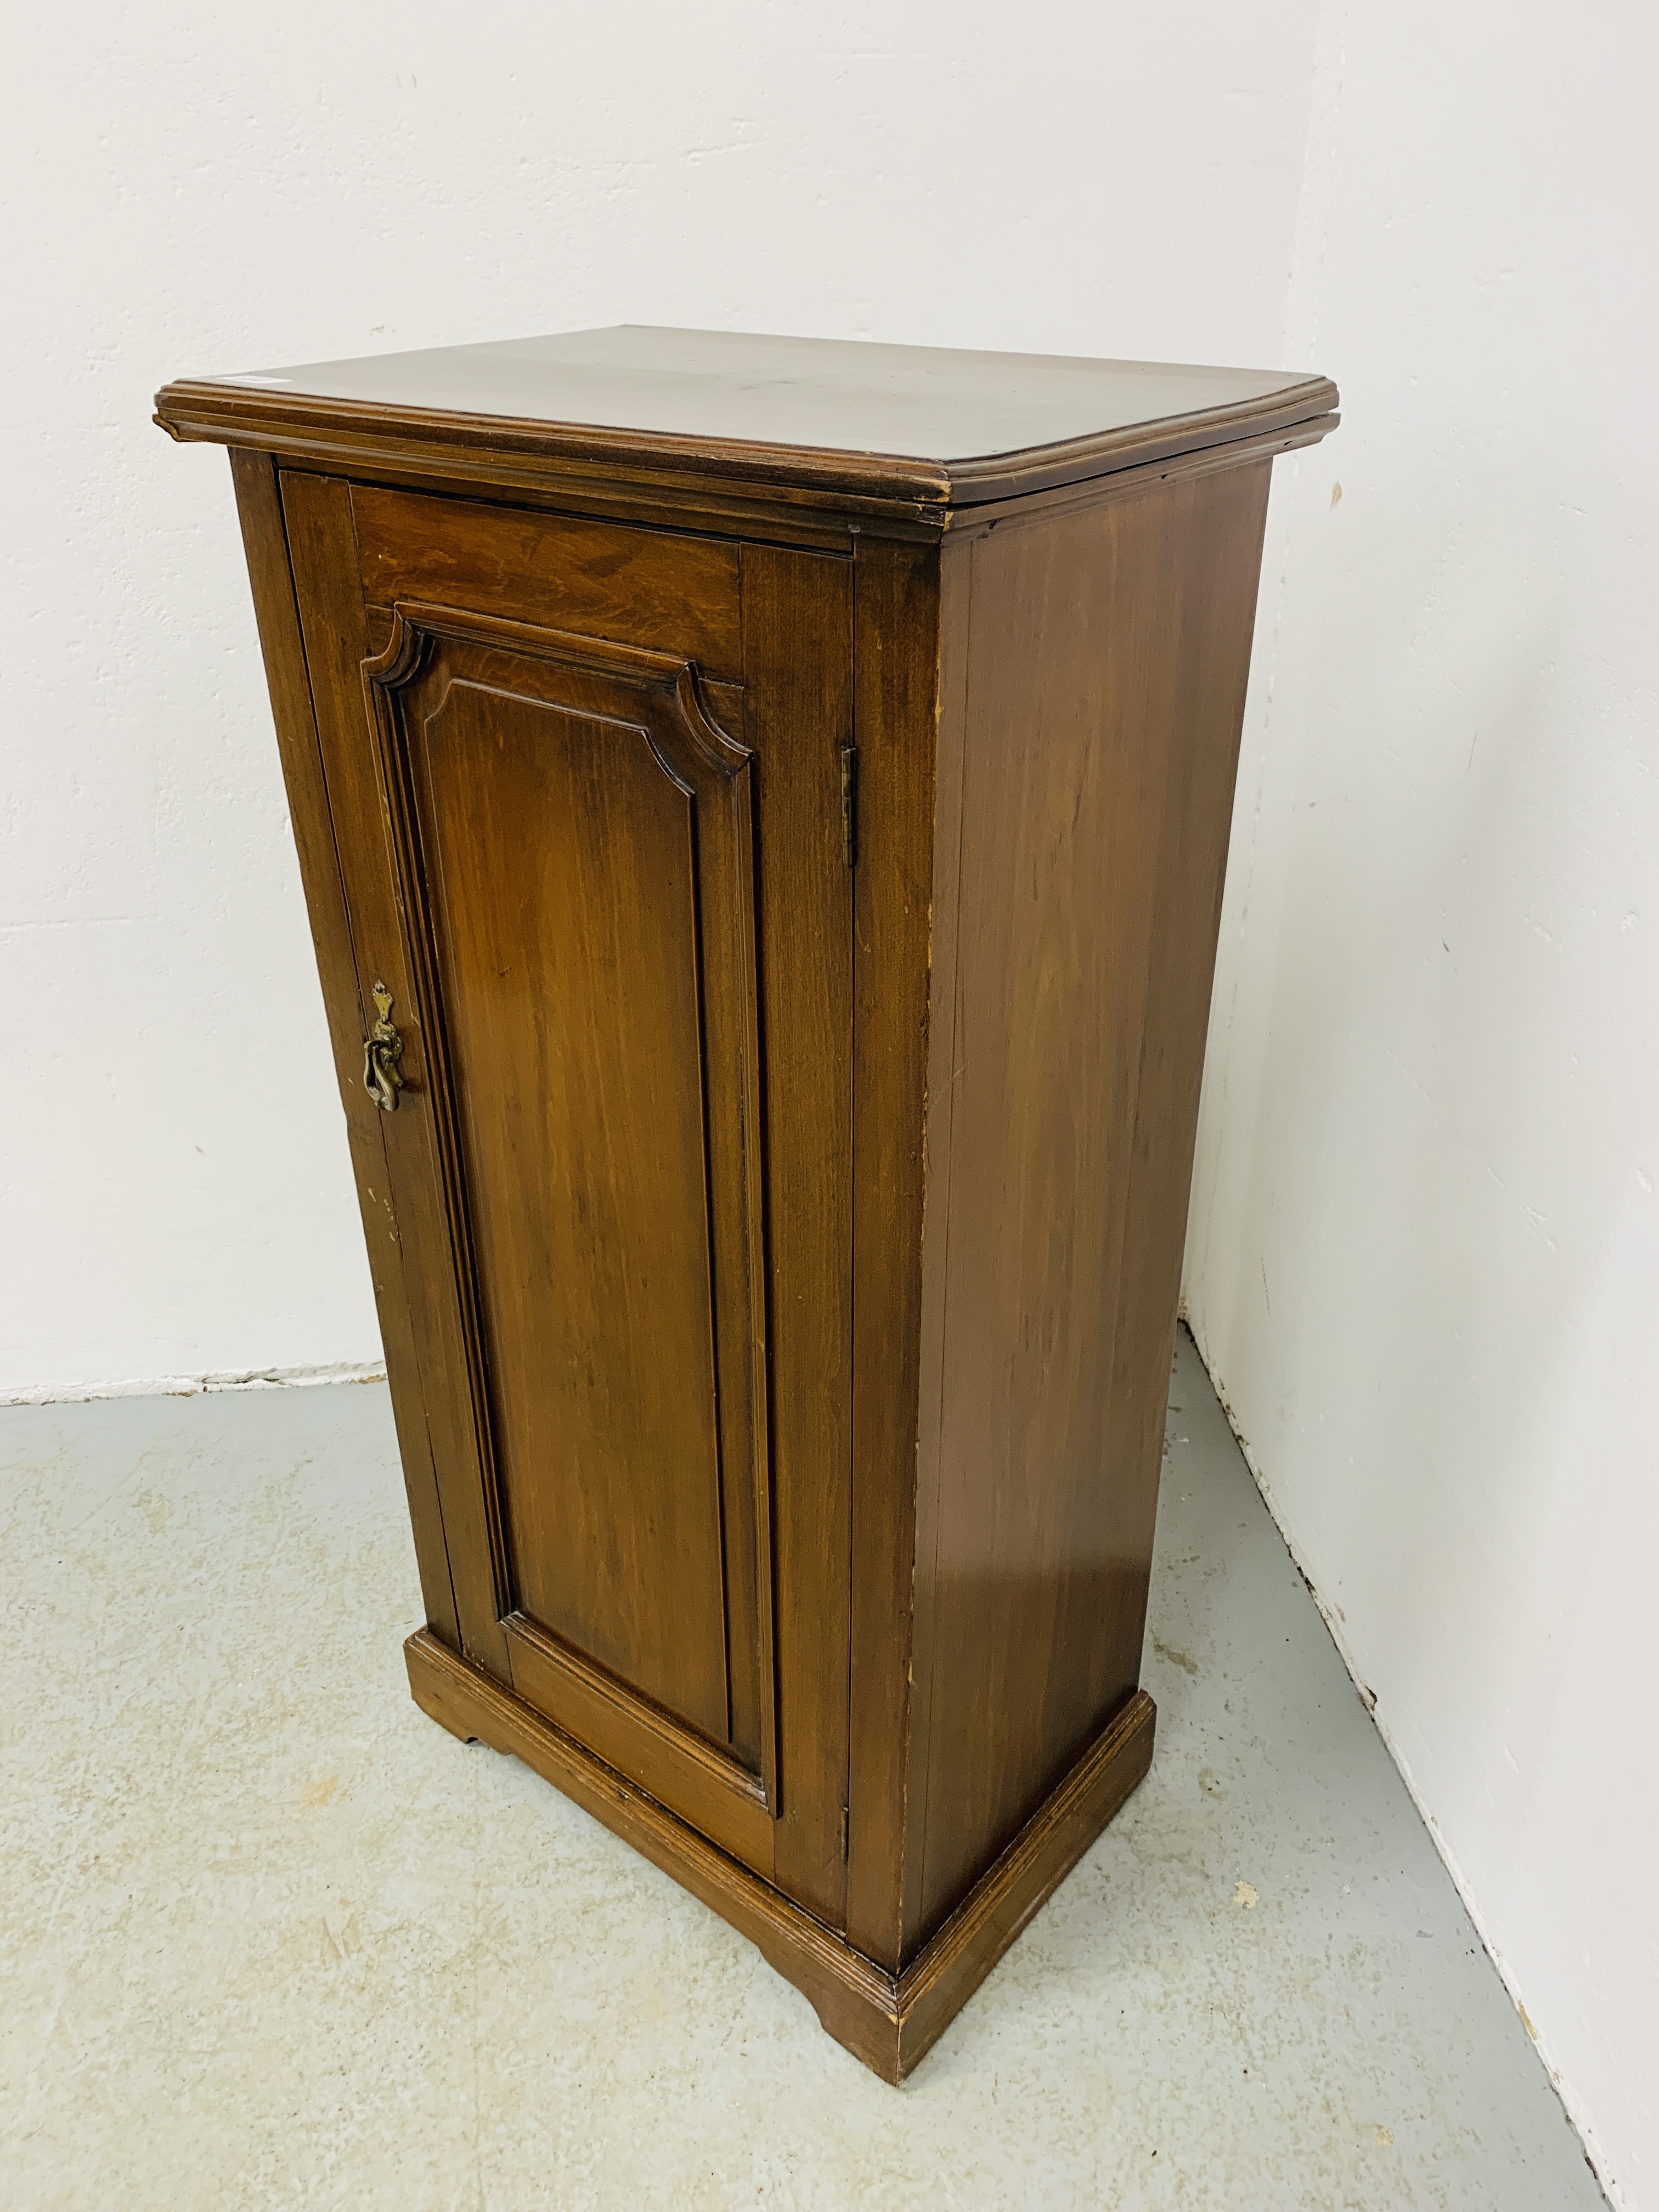 A HARDWOOD CABINET WITH PANEL DOOR AND SHELVED INTERIOR - W 50CM. D 35CM. H 100CM. - Image 2 of 7